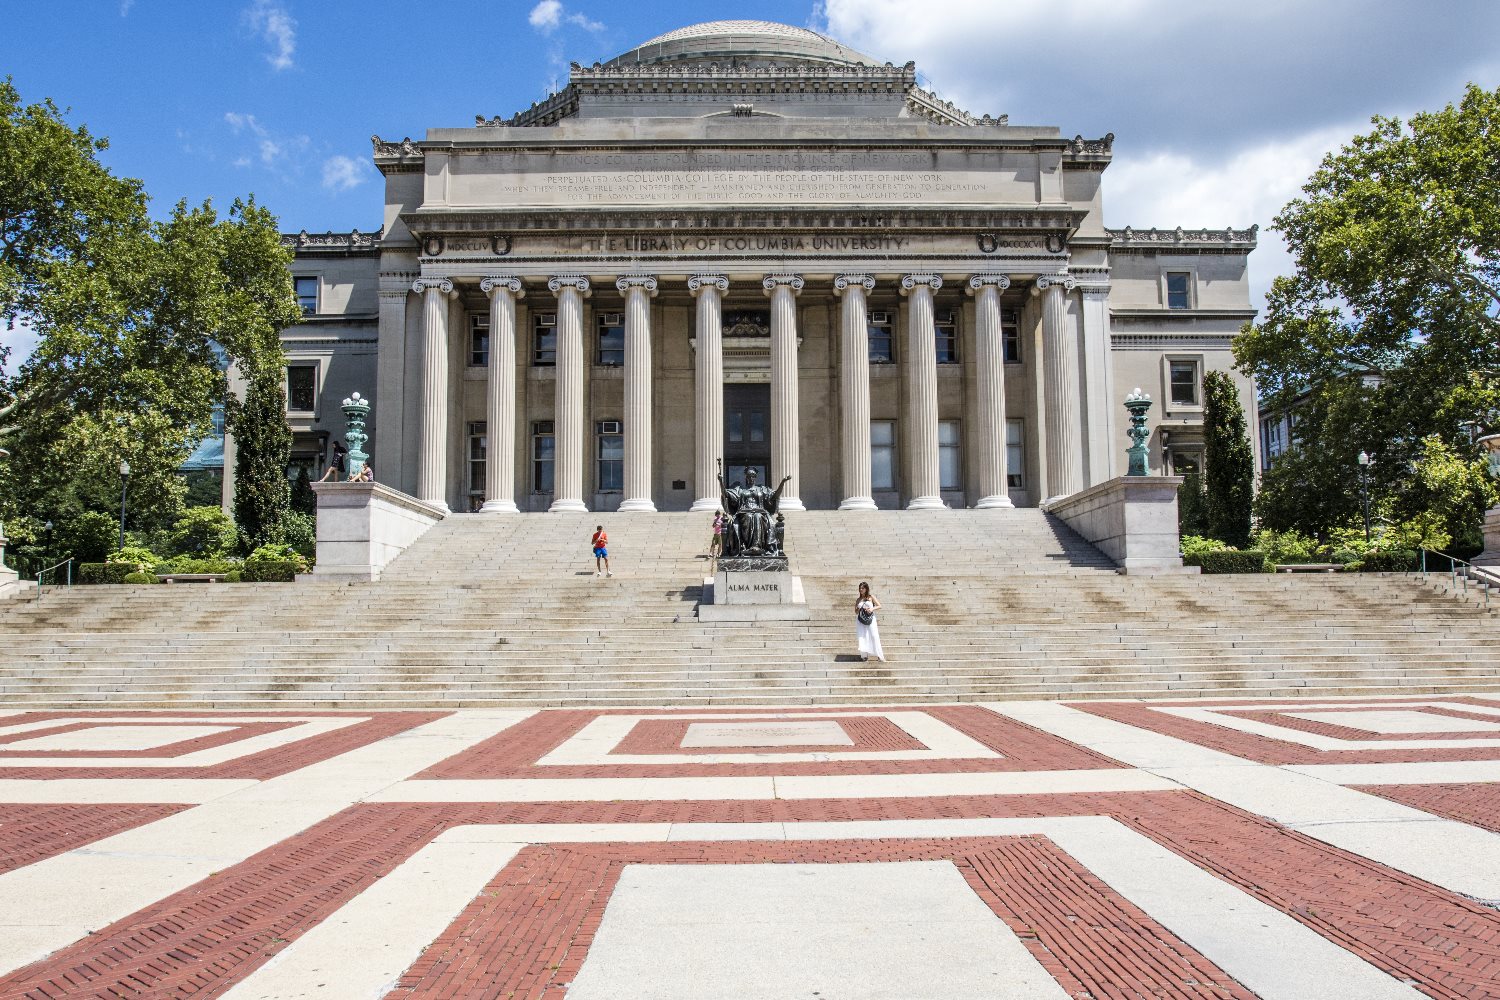 undergraduate research opportunities at columbia